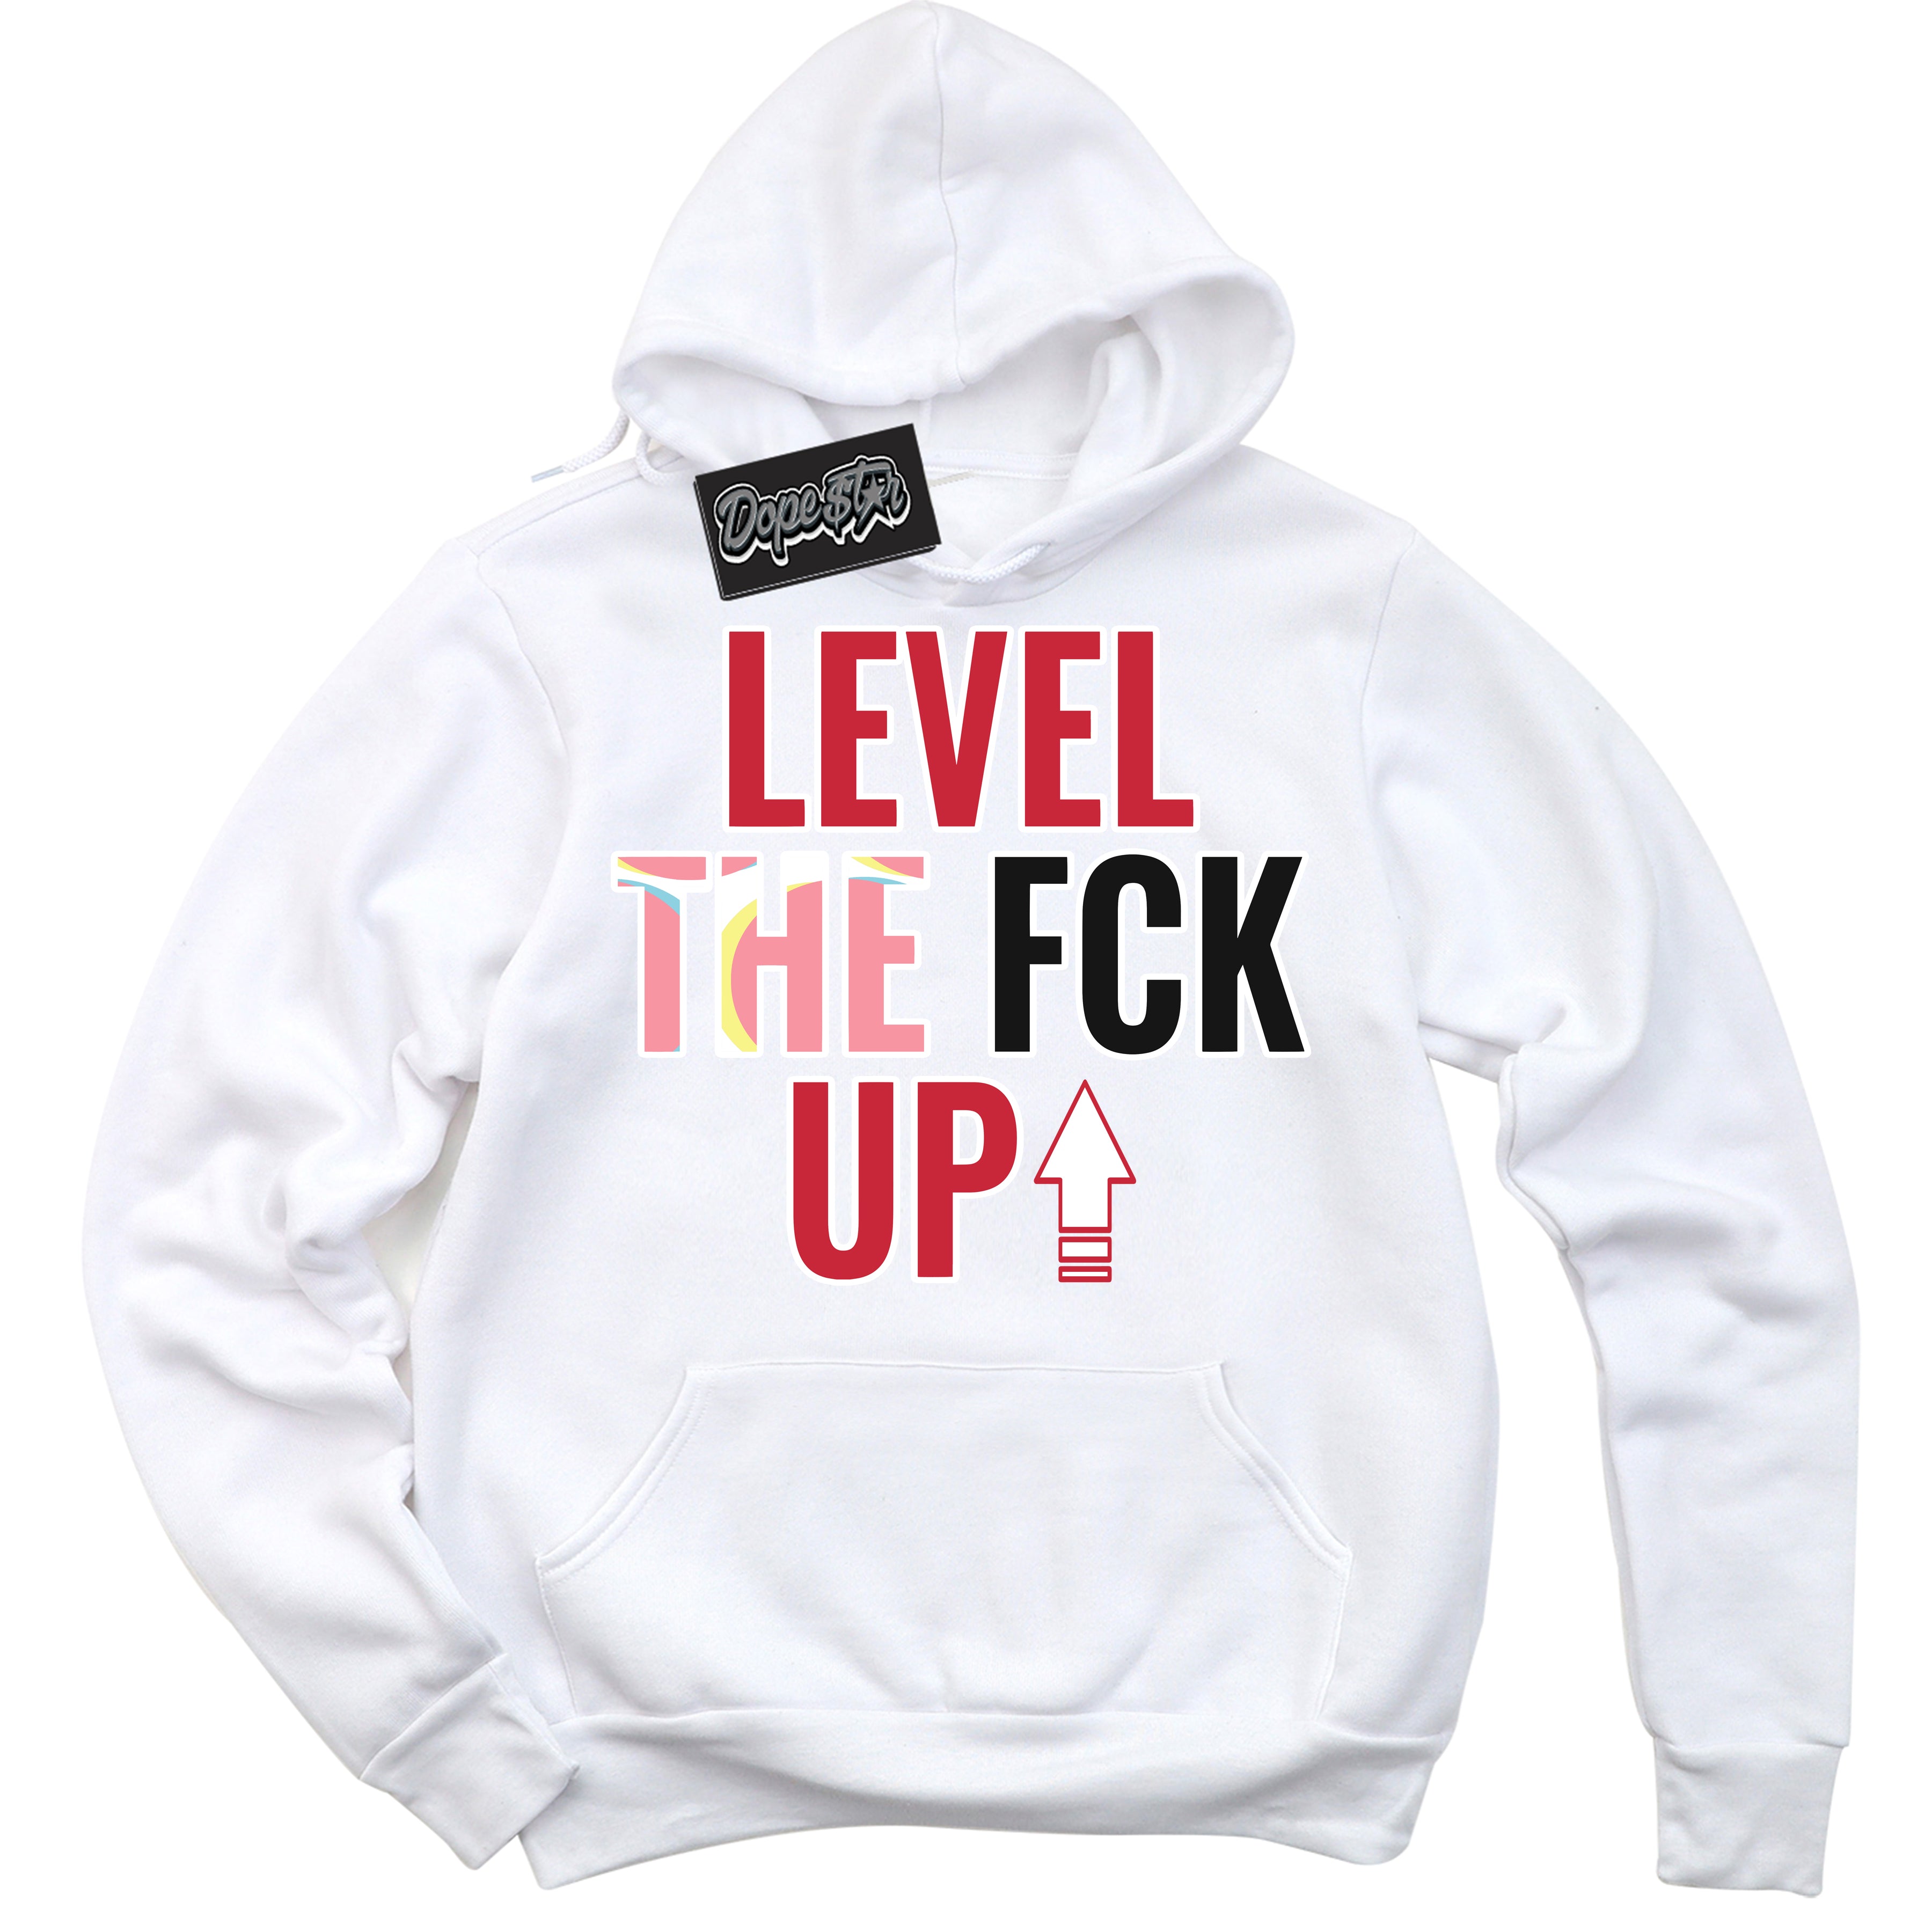 Cool White Graphic DopeStar Hoodie with “ Level The Fck Up “ print, that perfectly matches Spider-Verse 1s sneakers